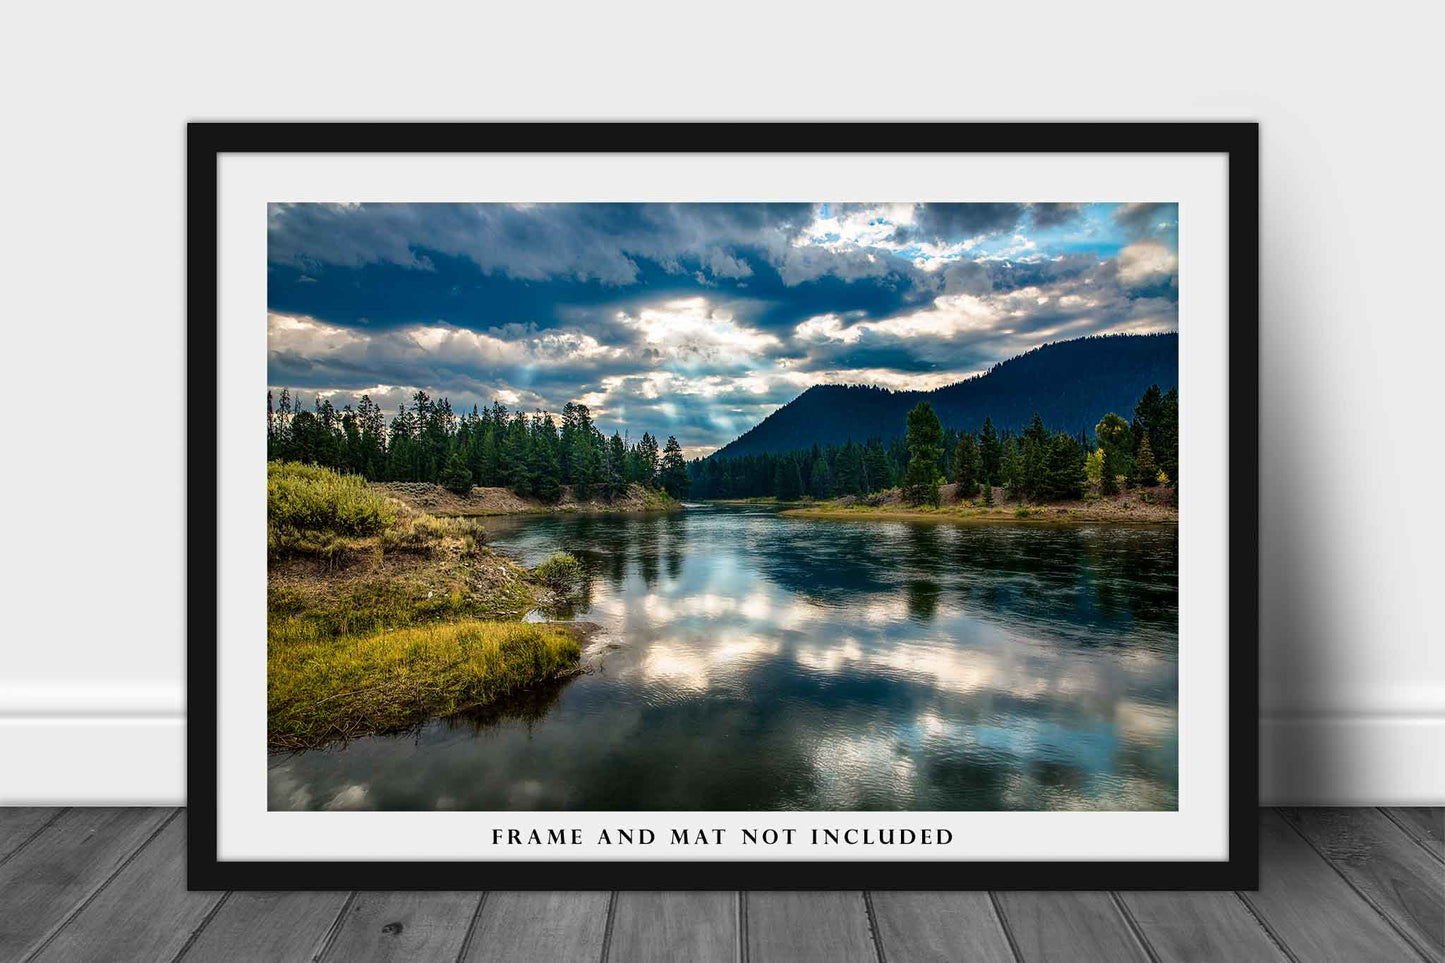 Grand Teton National Park Photo Print | Snake River Picture | Wyoming Wall Art | Landscape Photography | Rocky Mountain Decor